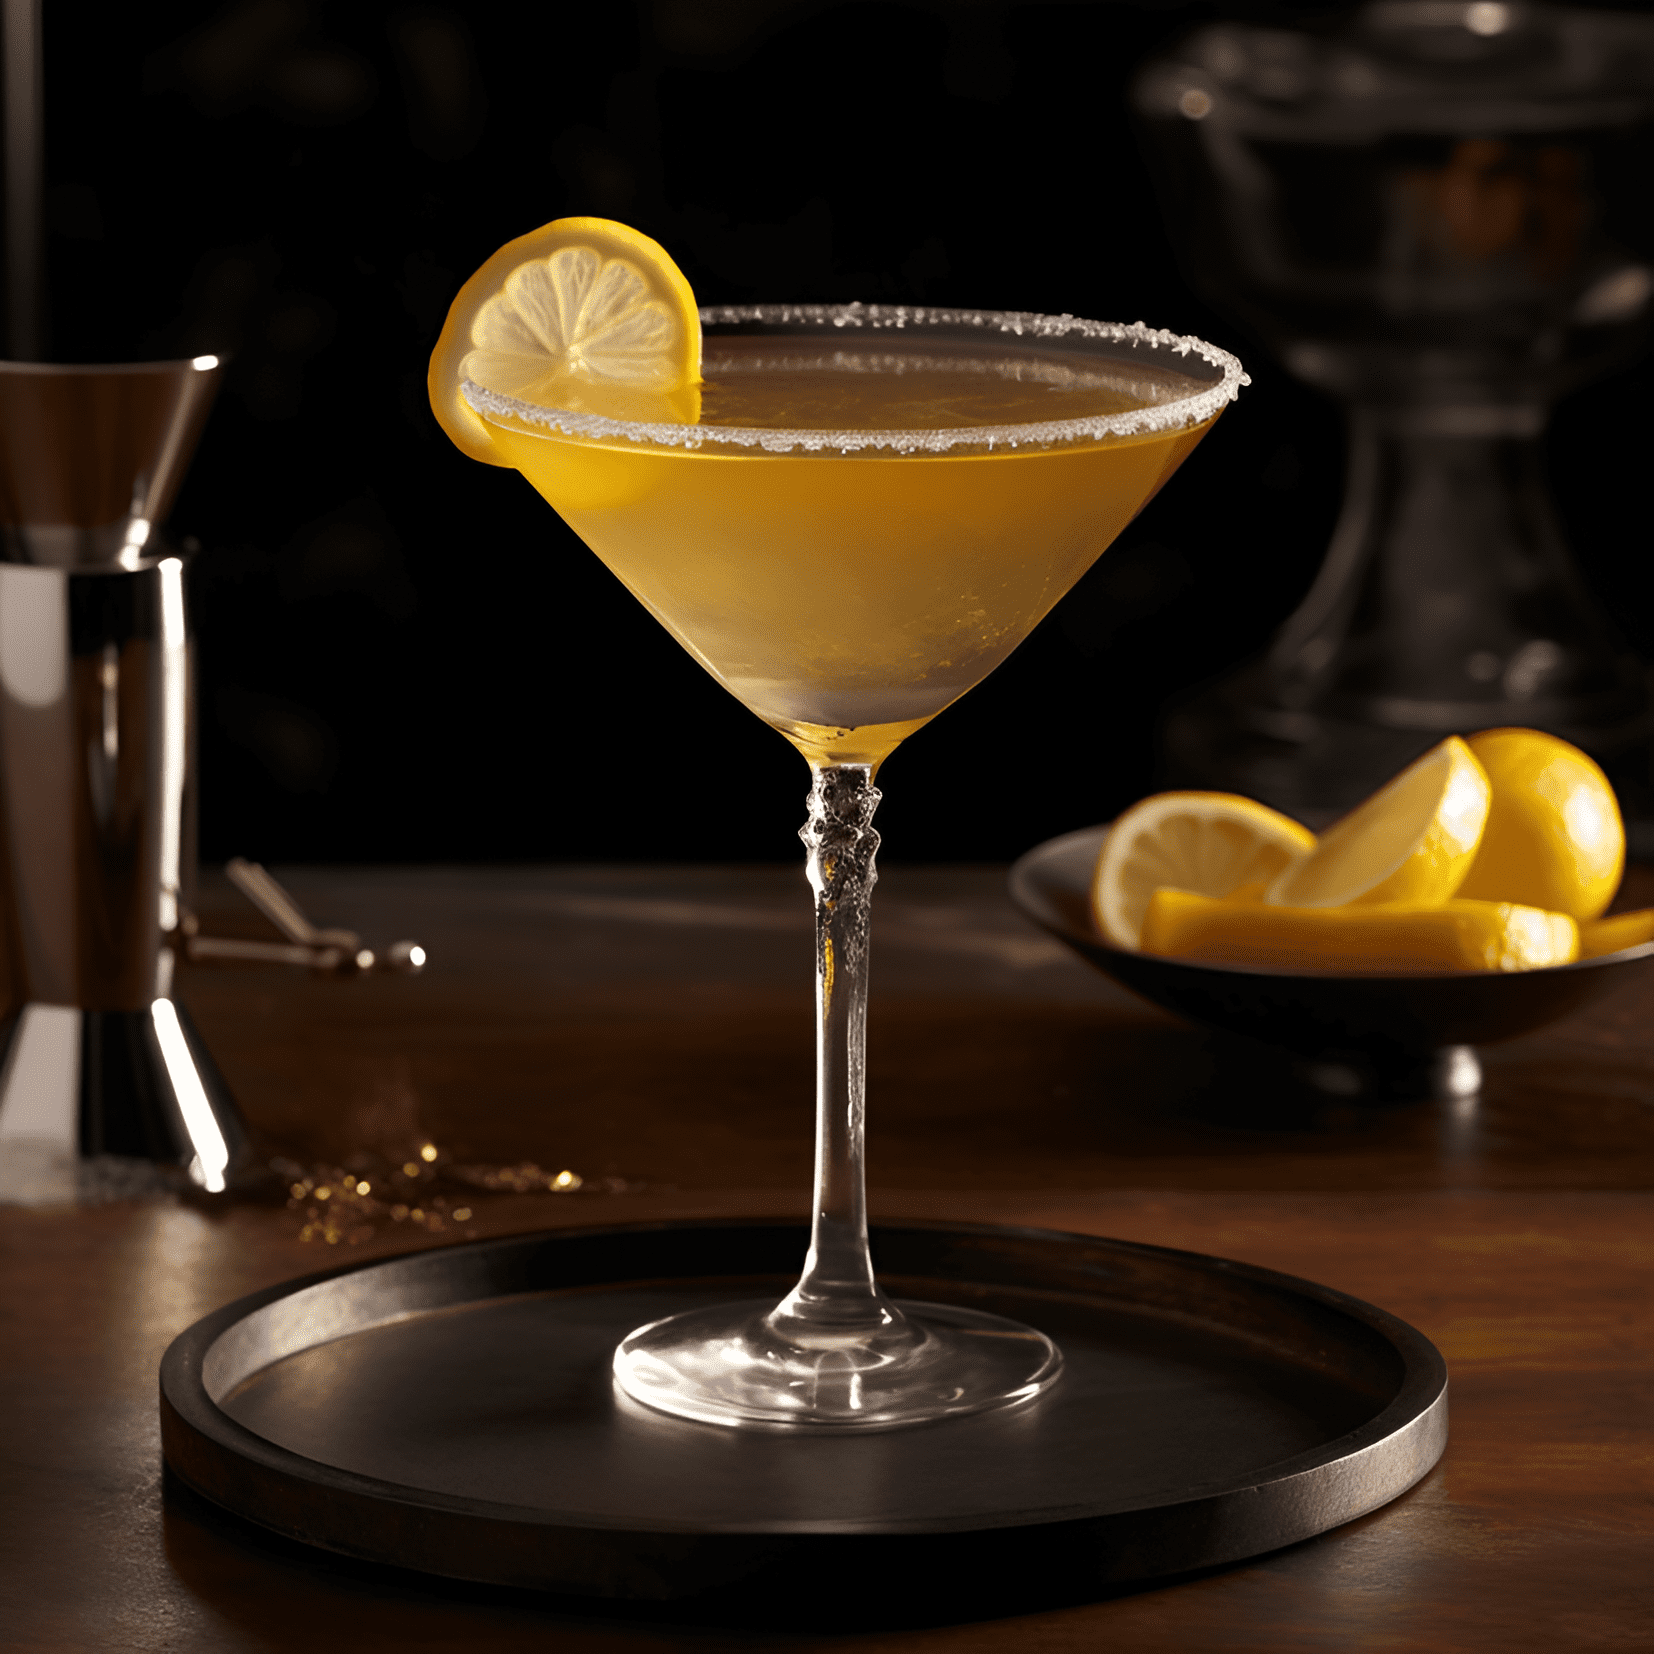 Saratoga Cocktail Recipe - The Saratoga cocktail is a well-balanced mix of sweet, sour, and strong flavors. The brandy and whiskey provide a rich, warming base, while the sweet vermouth adds a touch of sweetness. The lemon juice and bitters contribute a refreshing tartness and complexity to the drink.